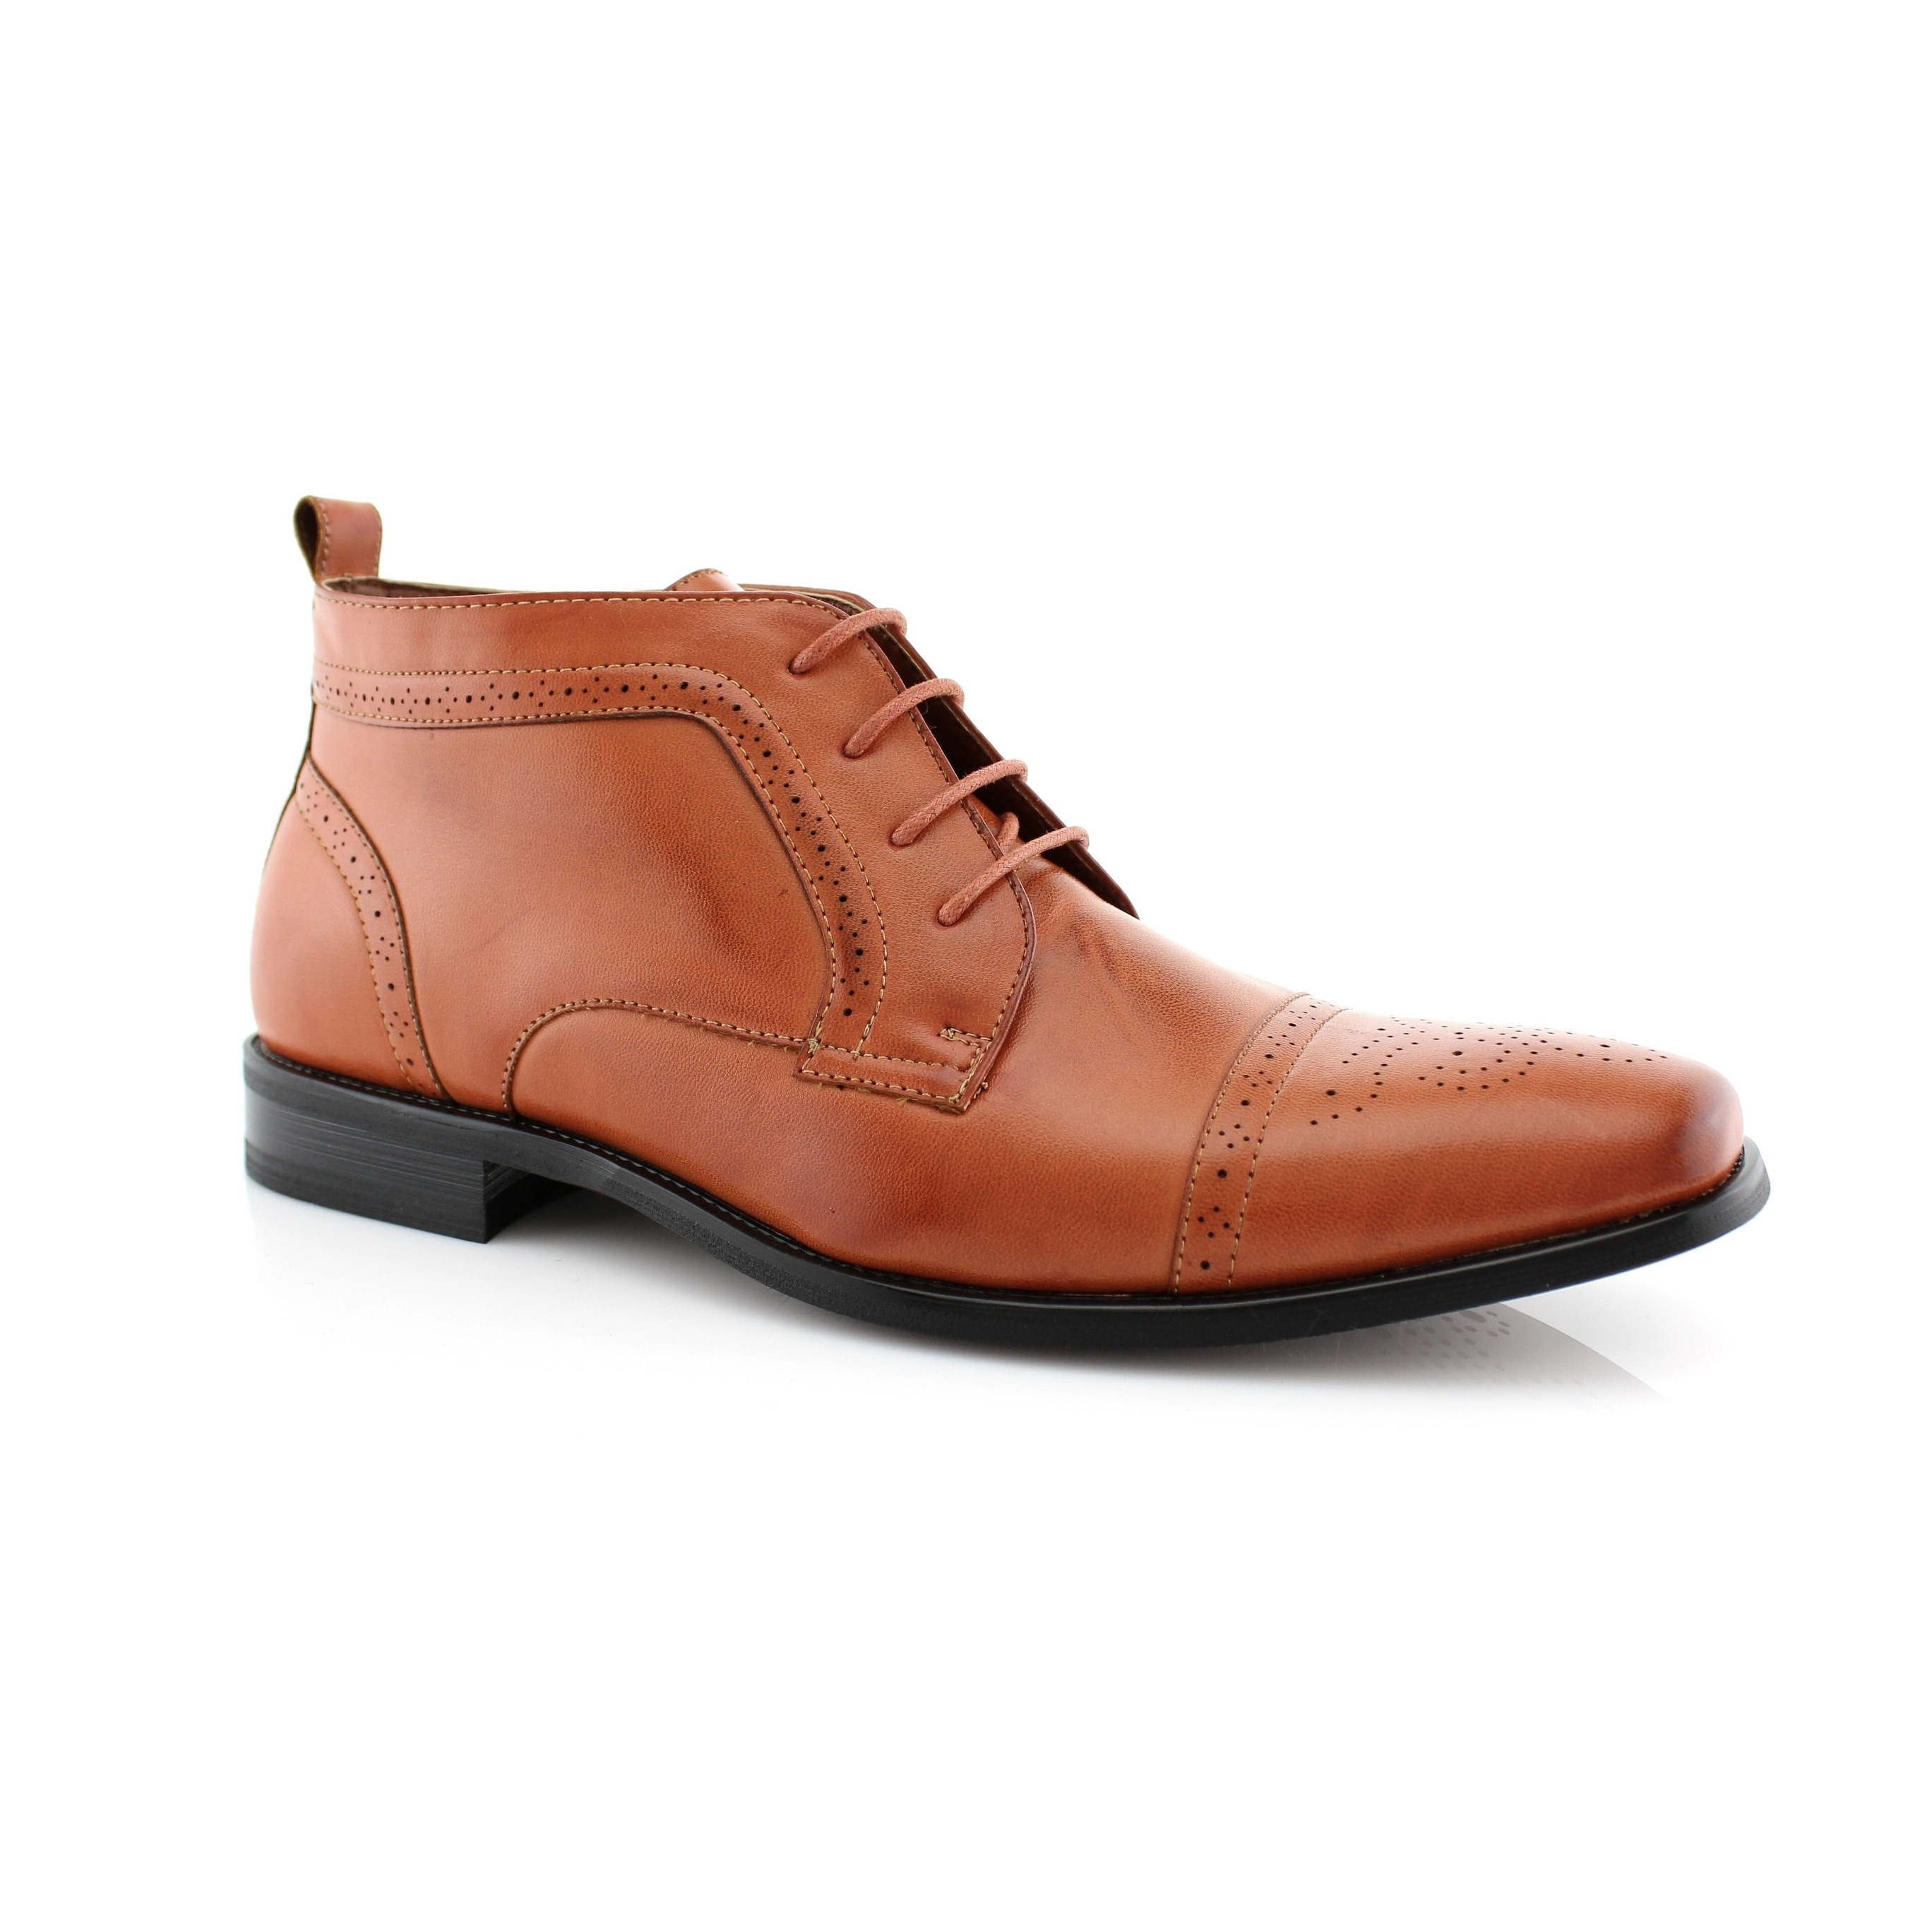 dress shoes for work mens